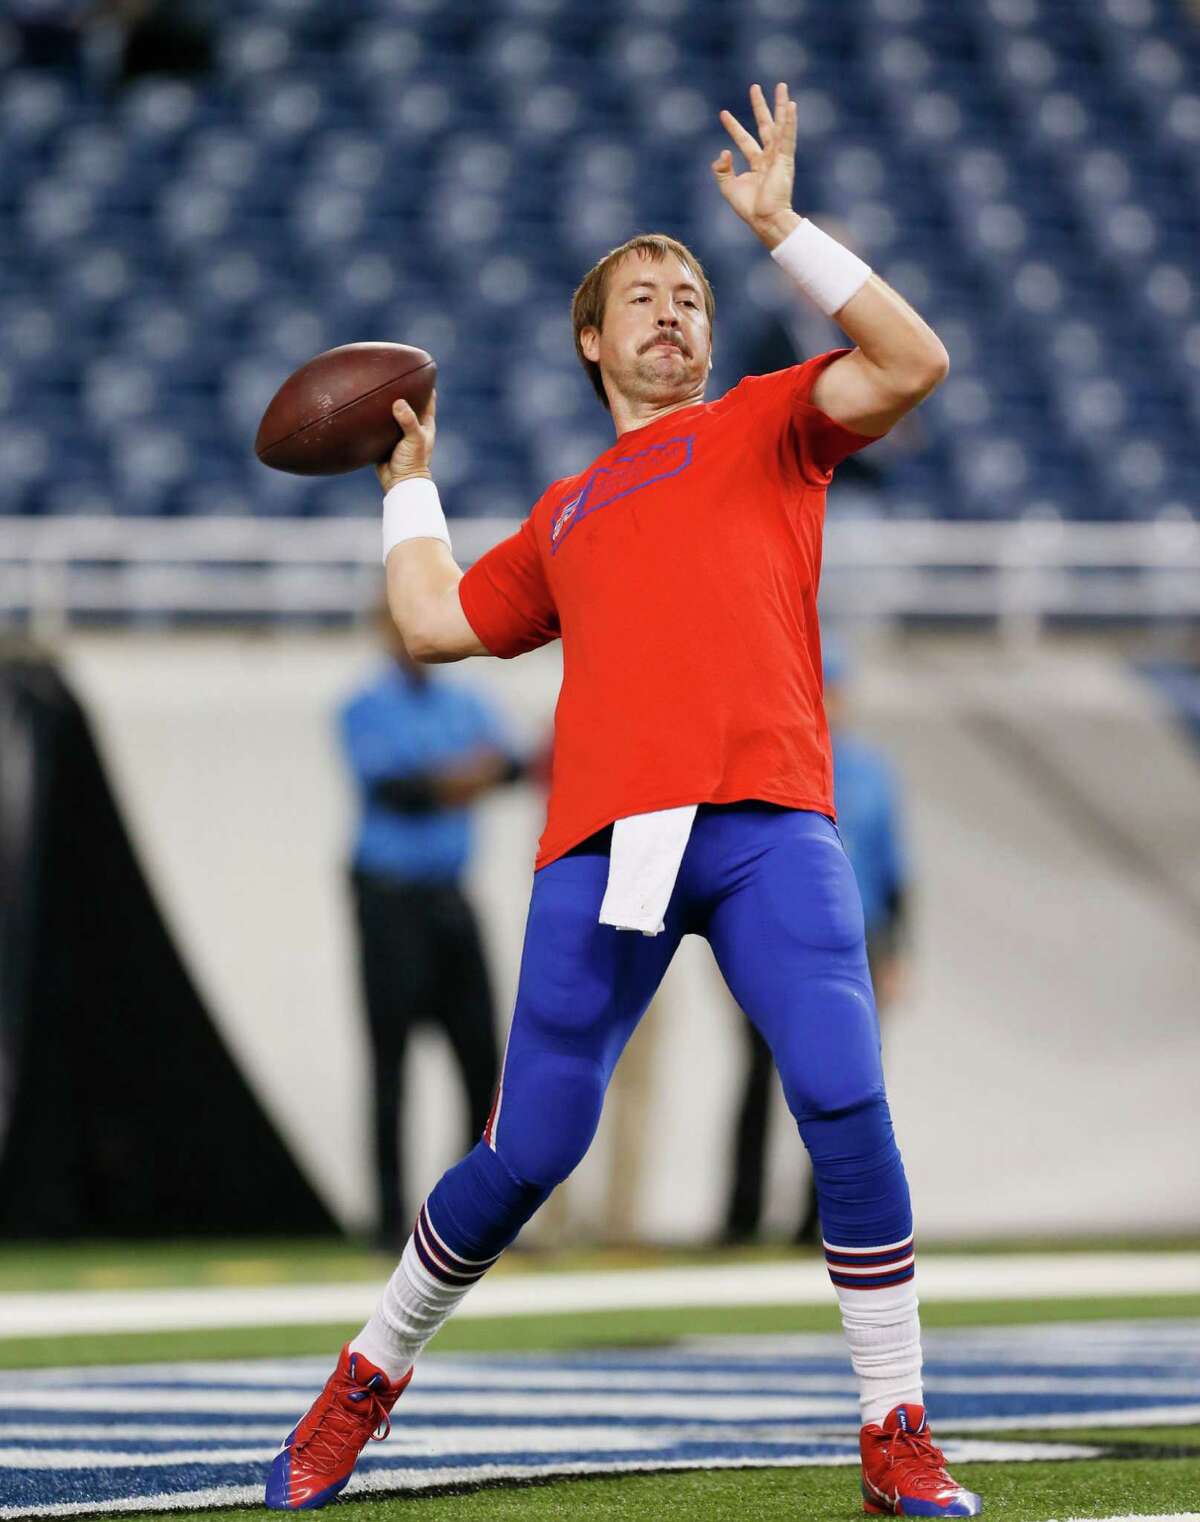 Buffalo Bills quarterback Kyle Orton warms up before the Bills play the Detroit Lions during an NFL football game Sunday, Oct. 5, 2014, in Detroit. (AP Photo/Paul Sancya)